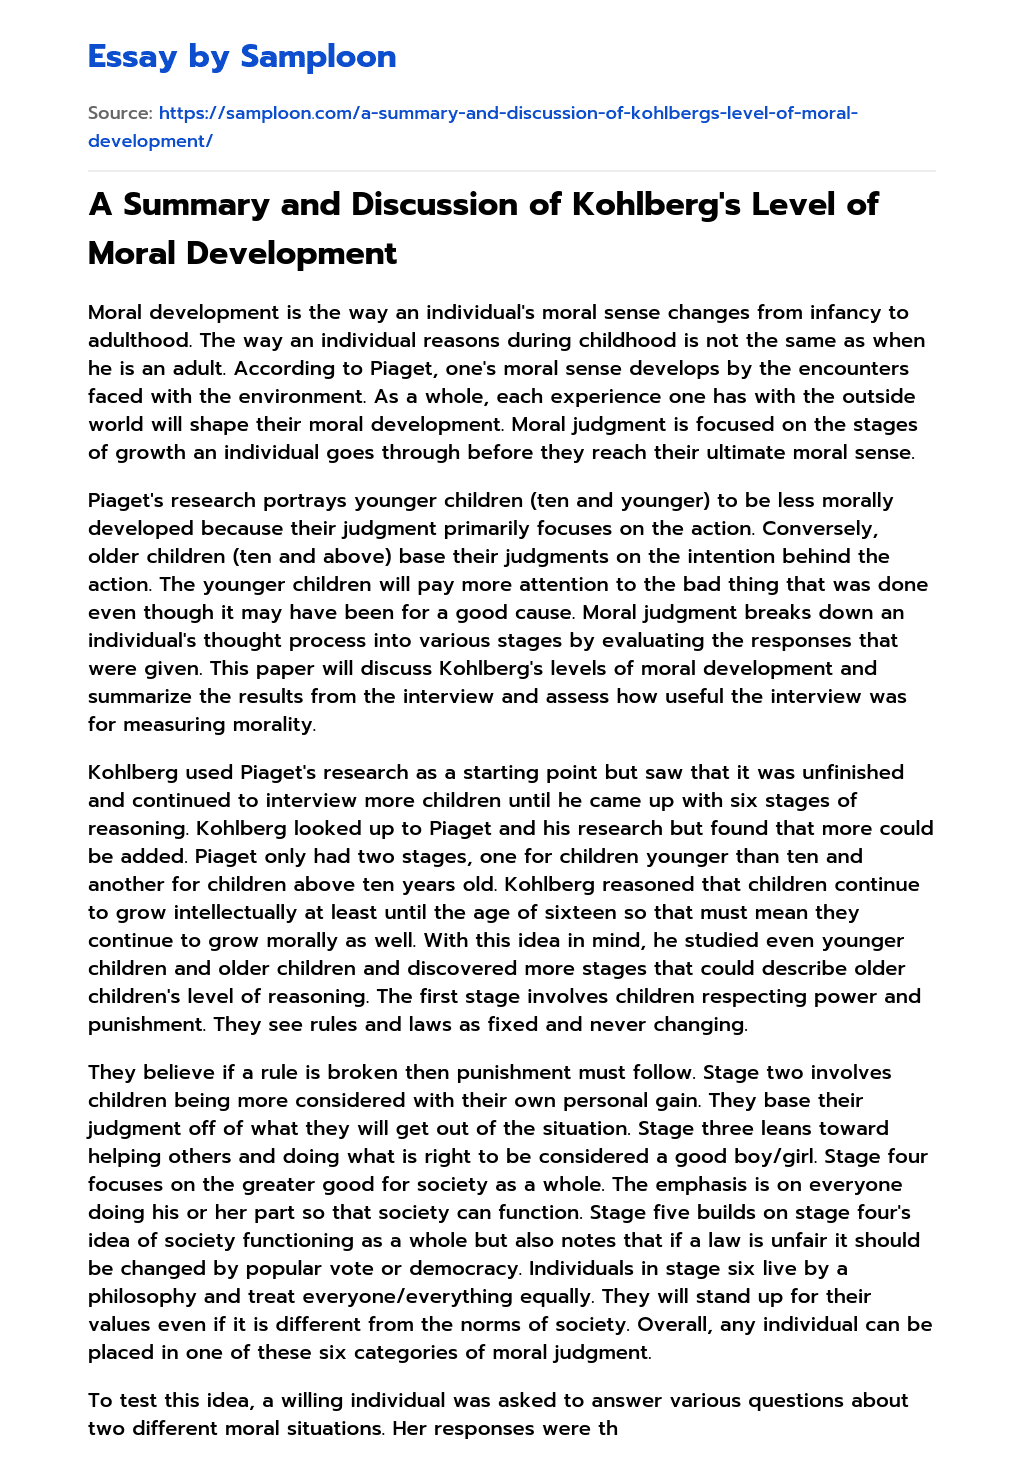 A Summary and Discussion of Kohlberg’s Level of Moral Development essay